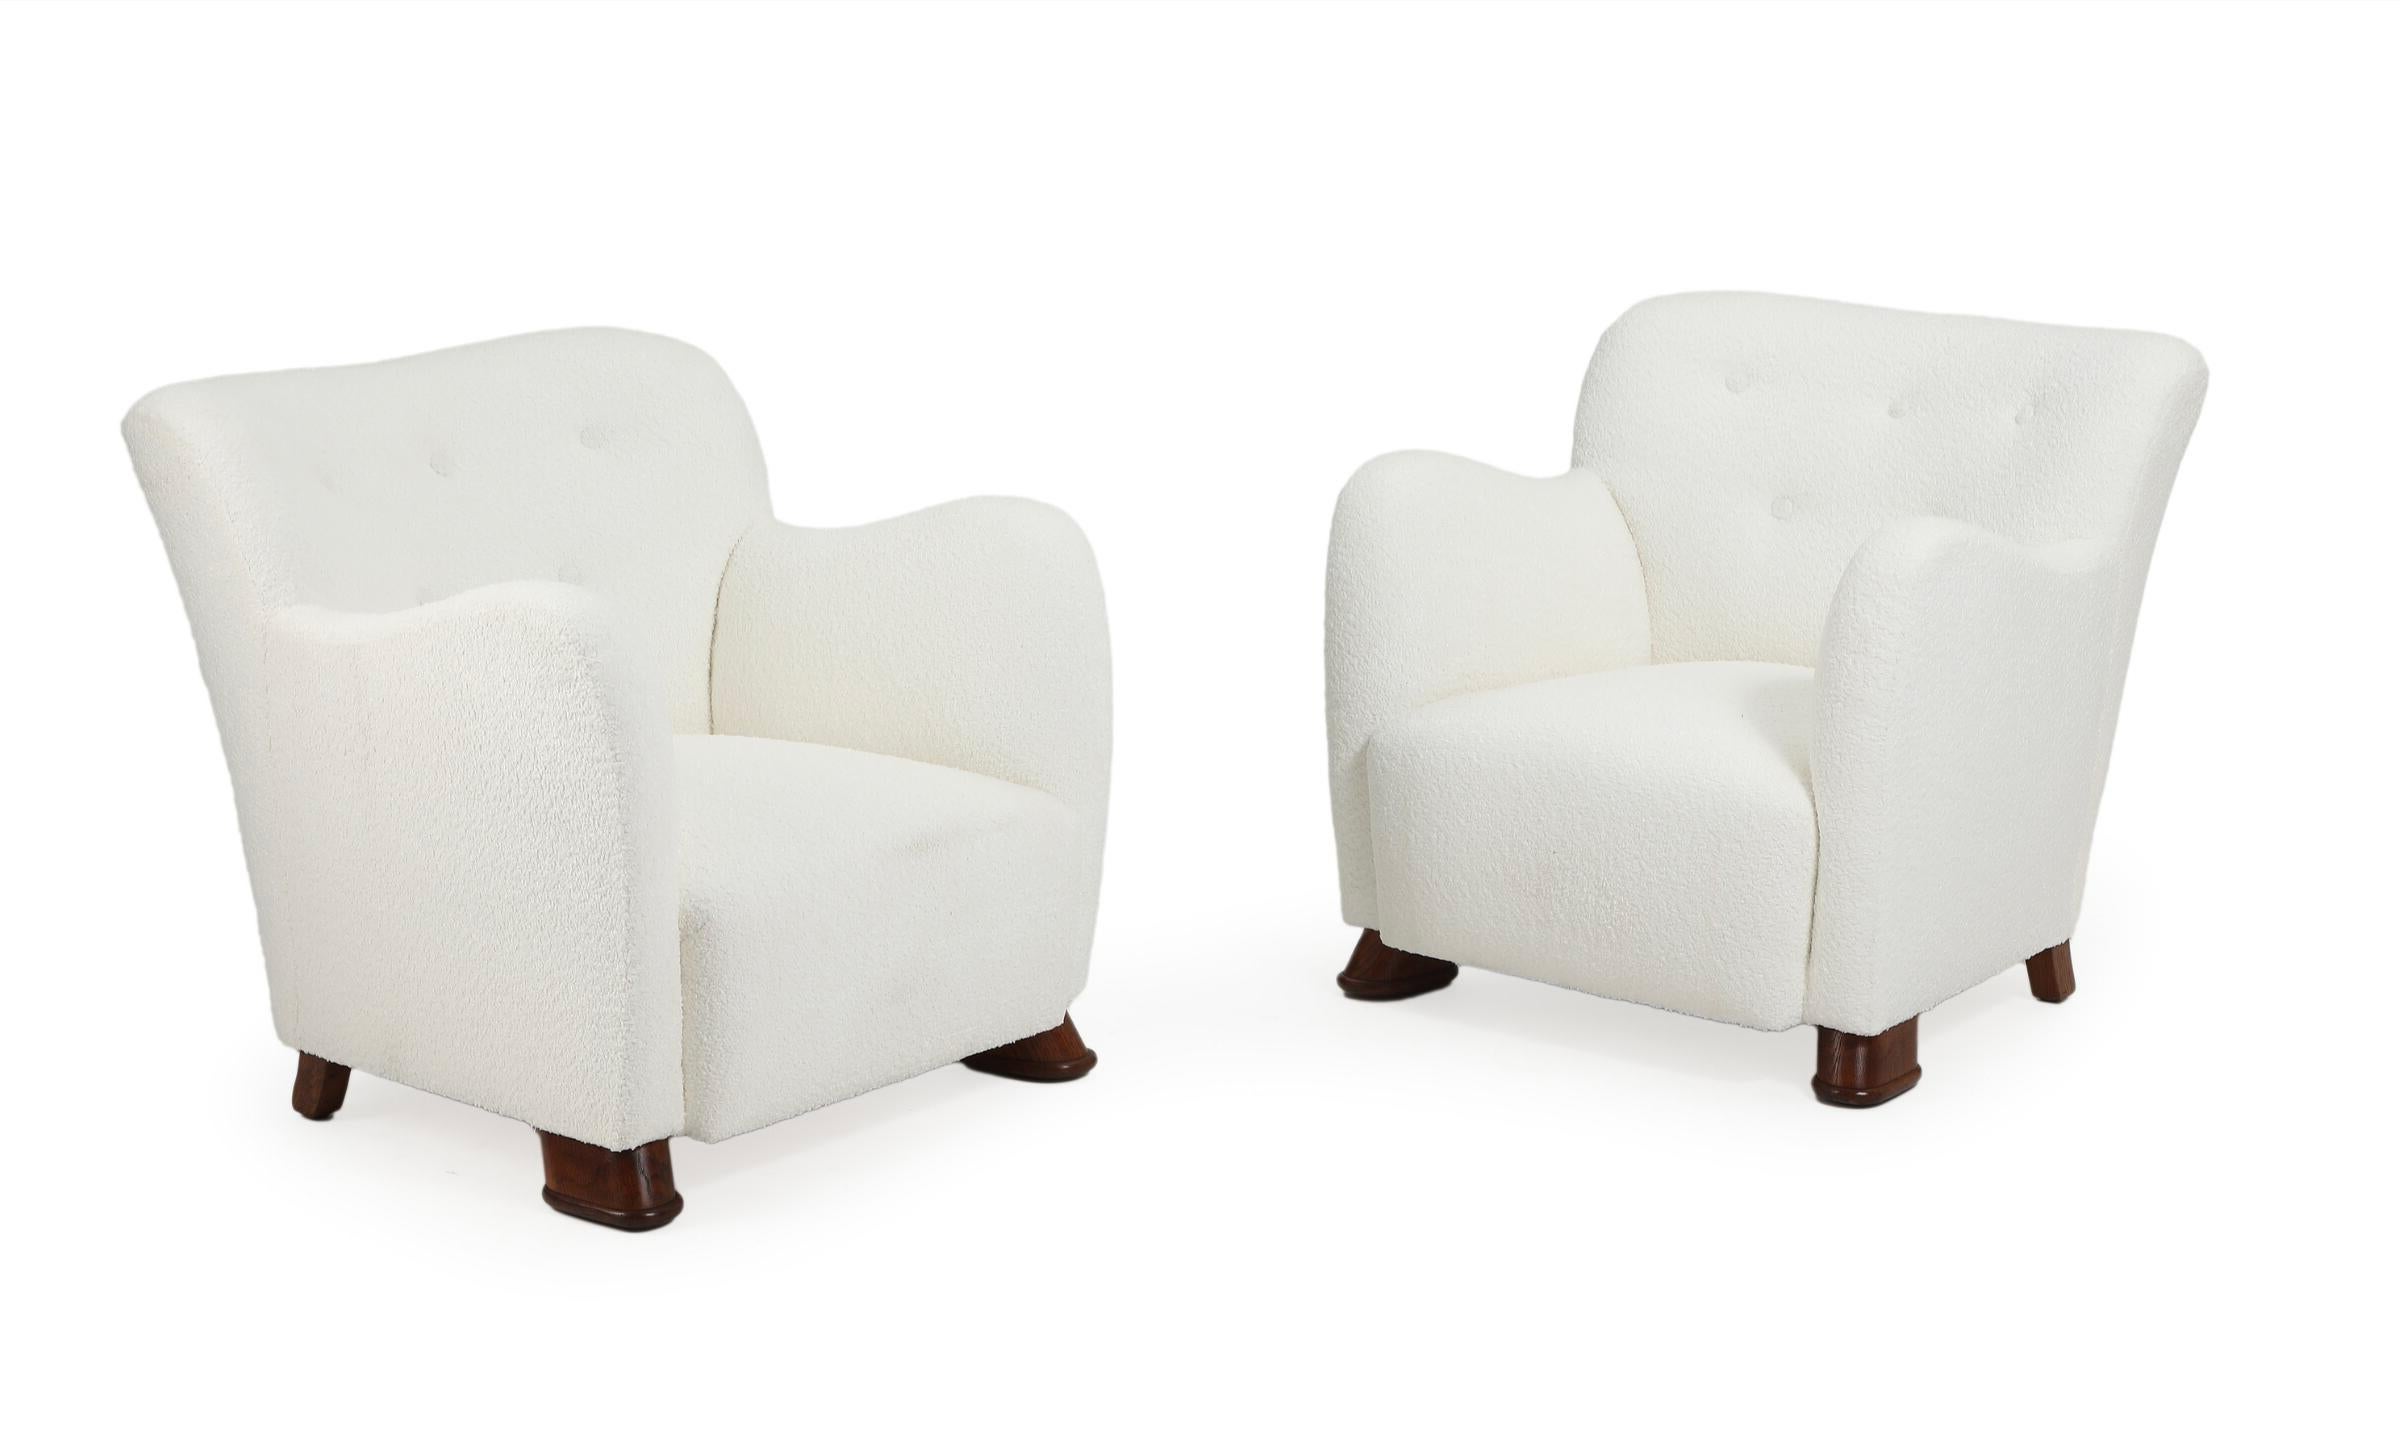 A Danish furniture design pair of easy armchairs upholstered with light bouclé. Original from 1940s Sweden. The chairs look in pristine condition and have not been used after a recent upholstery.

Feel free to request a delivery rate and we will do